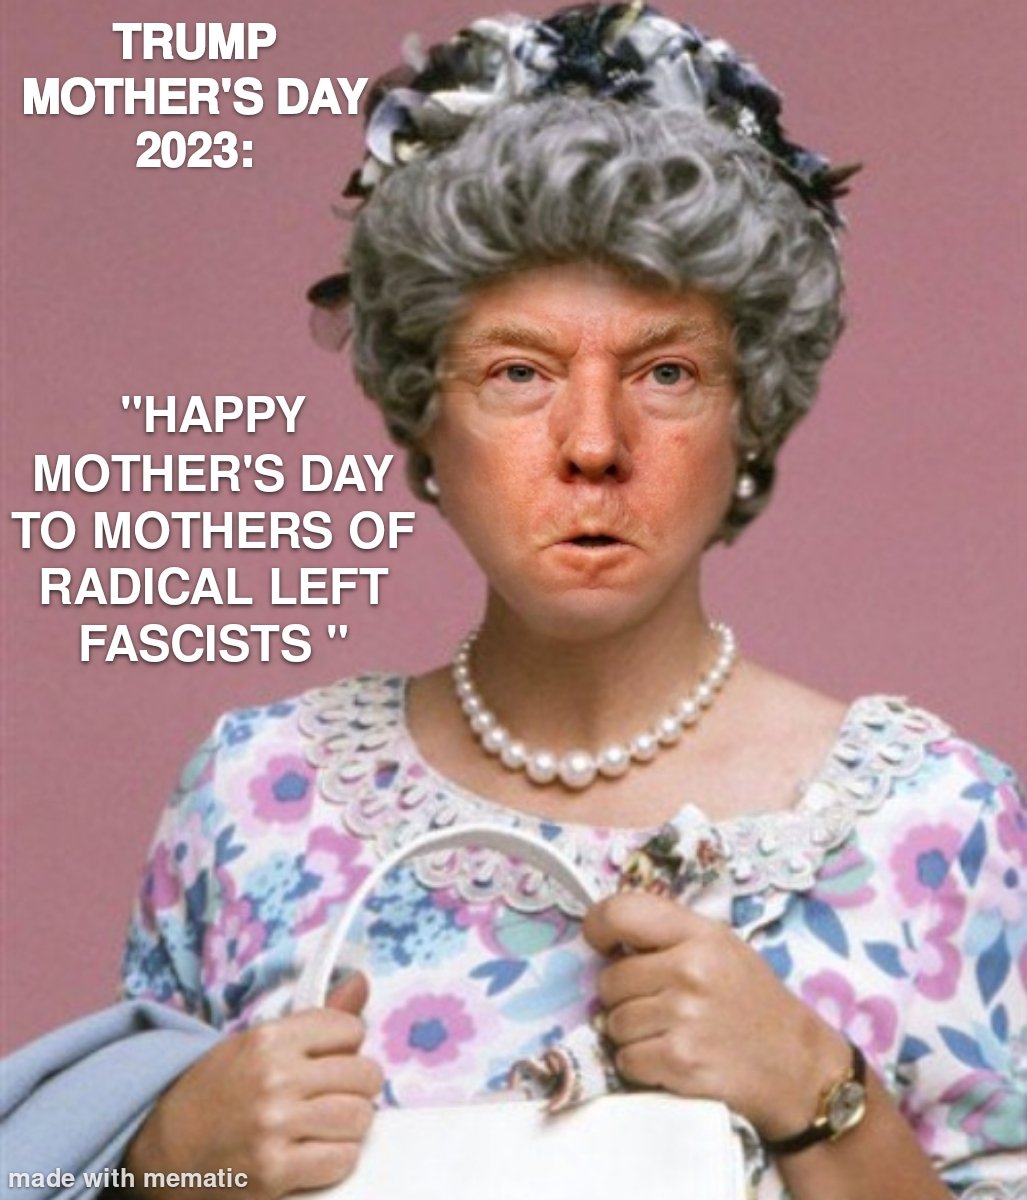 Barton probably has to get Fuckface 🤡 a Mother's Day gift as well, because Donnie is the biggliest whiny, pearl clutching, little fucking bitch.